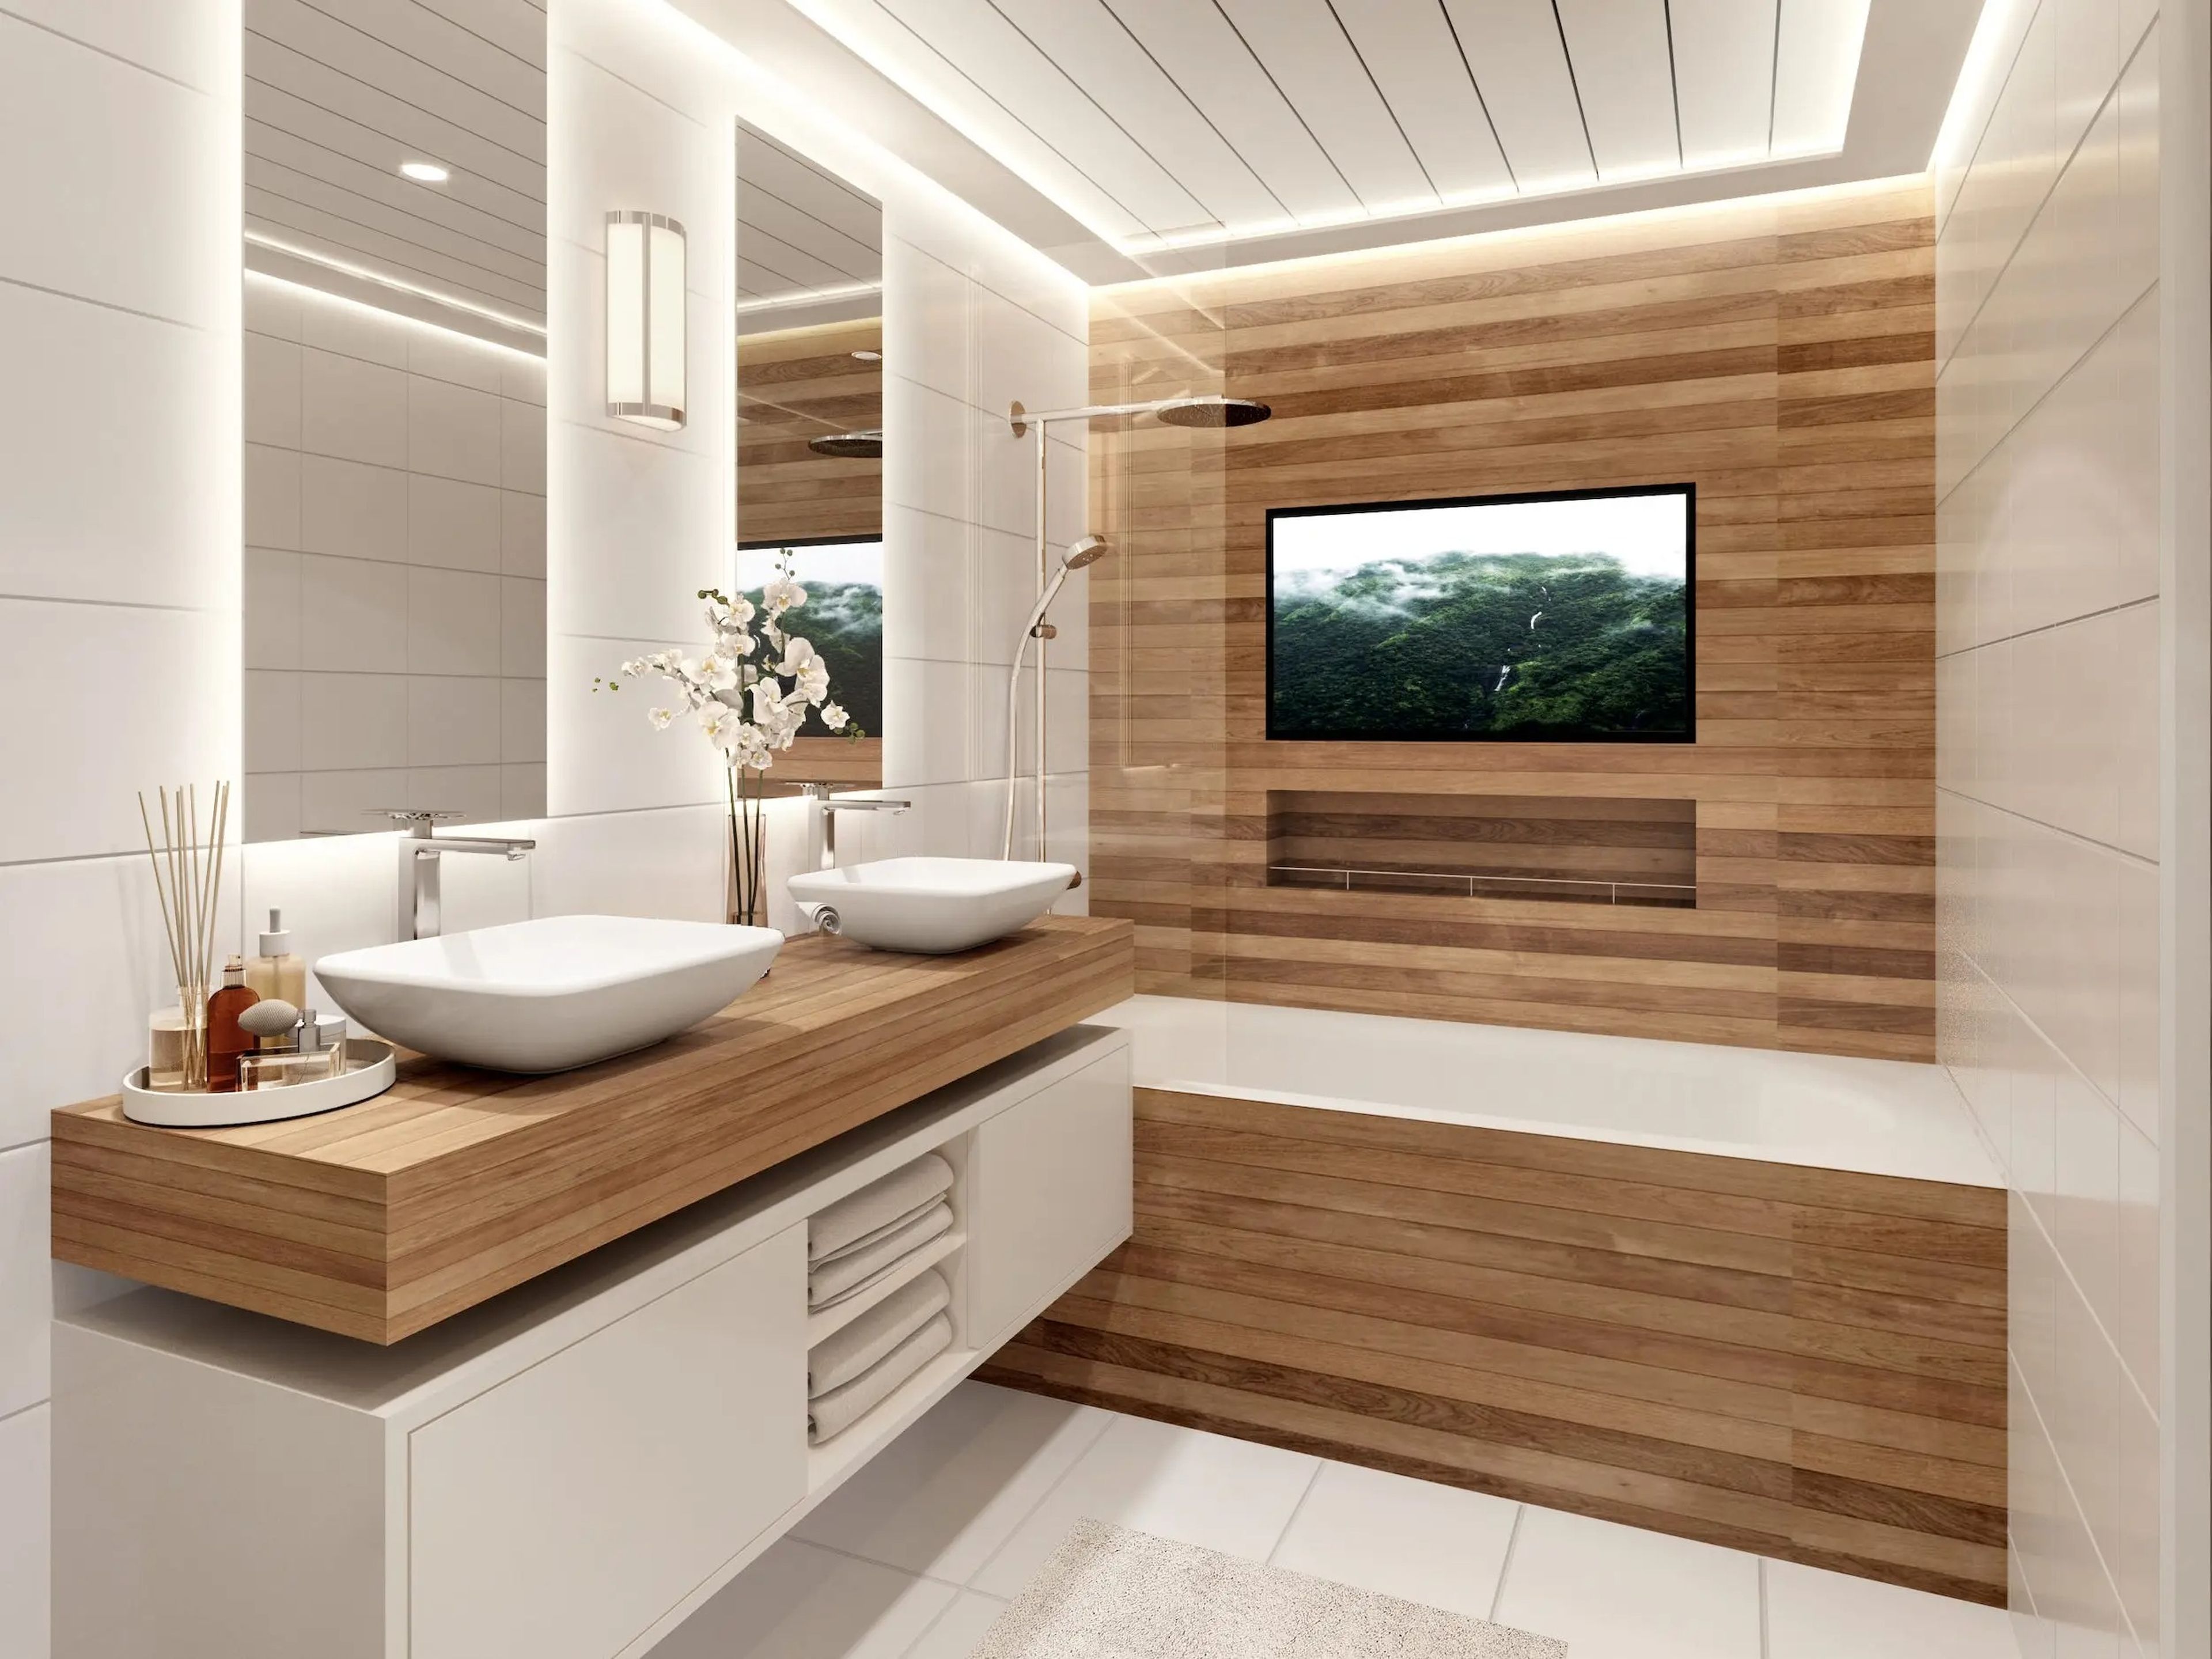 A rendering of the bathroom in Storylines' MV Narrative cruise ship.